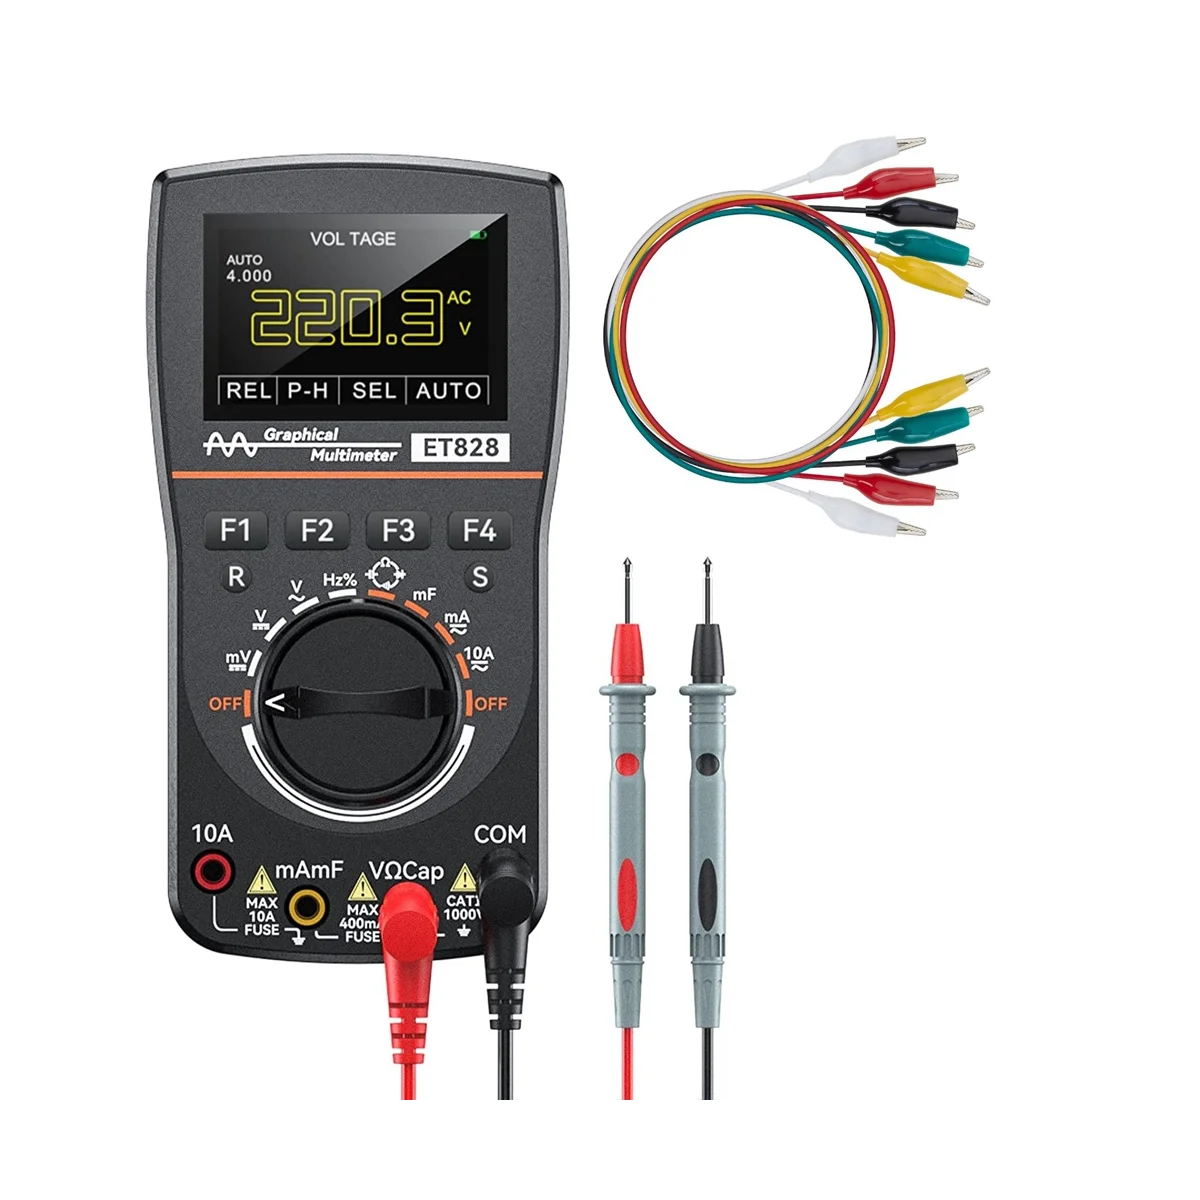 

2 in 1 Digital Oscilloscope Multimeter, Scope Meter with 2.5 Msps High Sampling,Current Frequency Resistance Diode Test